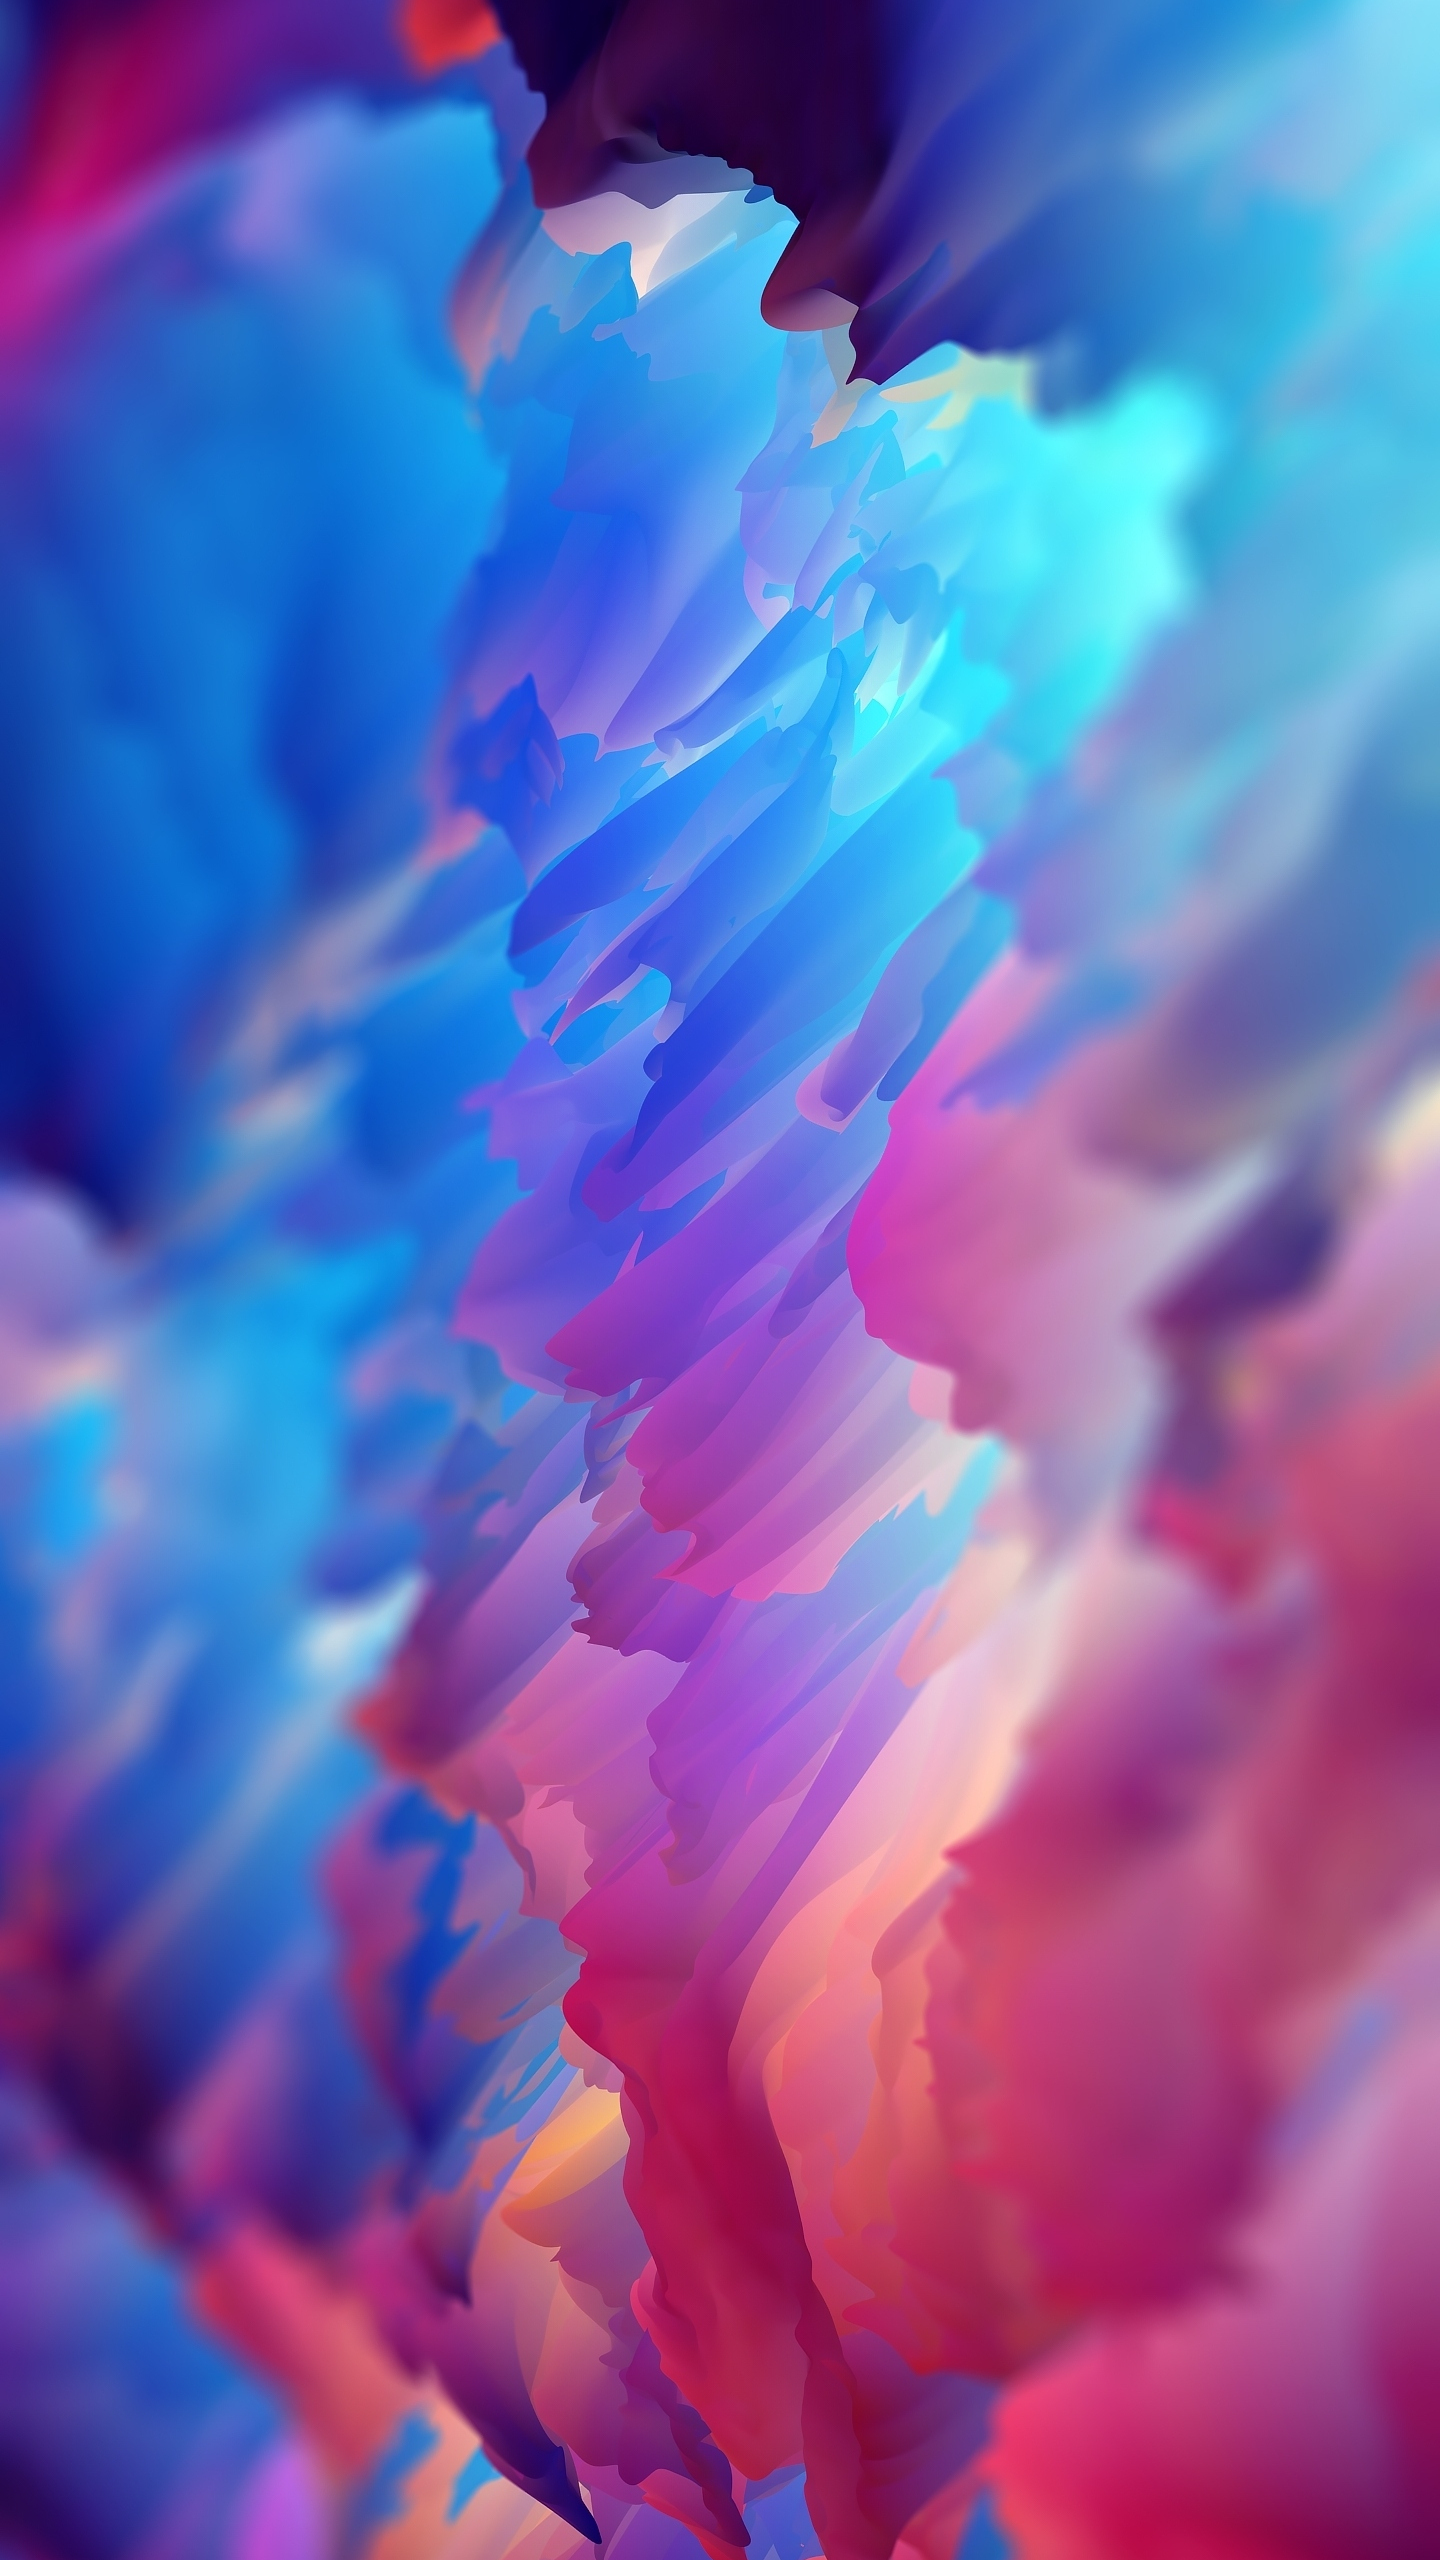 Download 1440x2560 wallpaper surface, colorful, abstract, bright, qhd